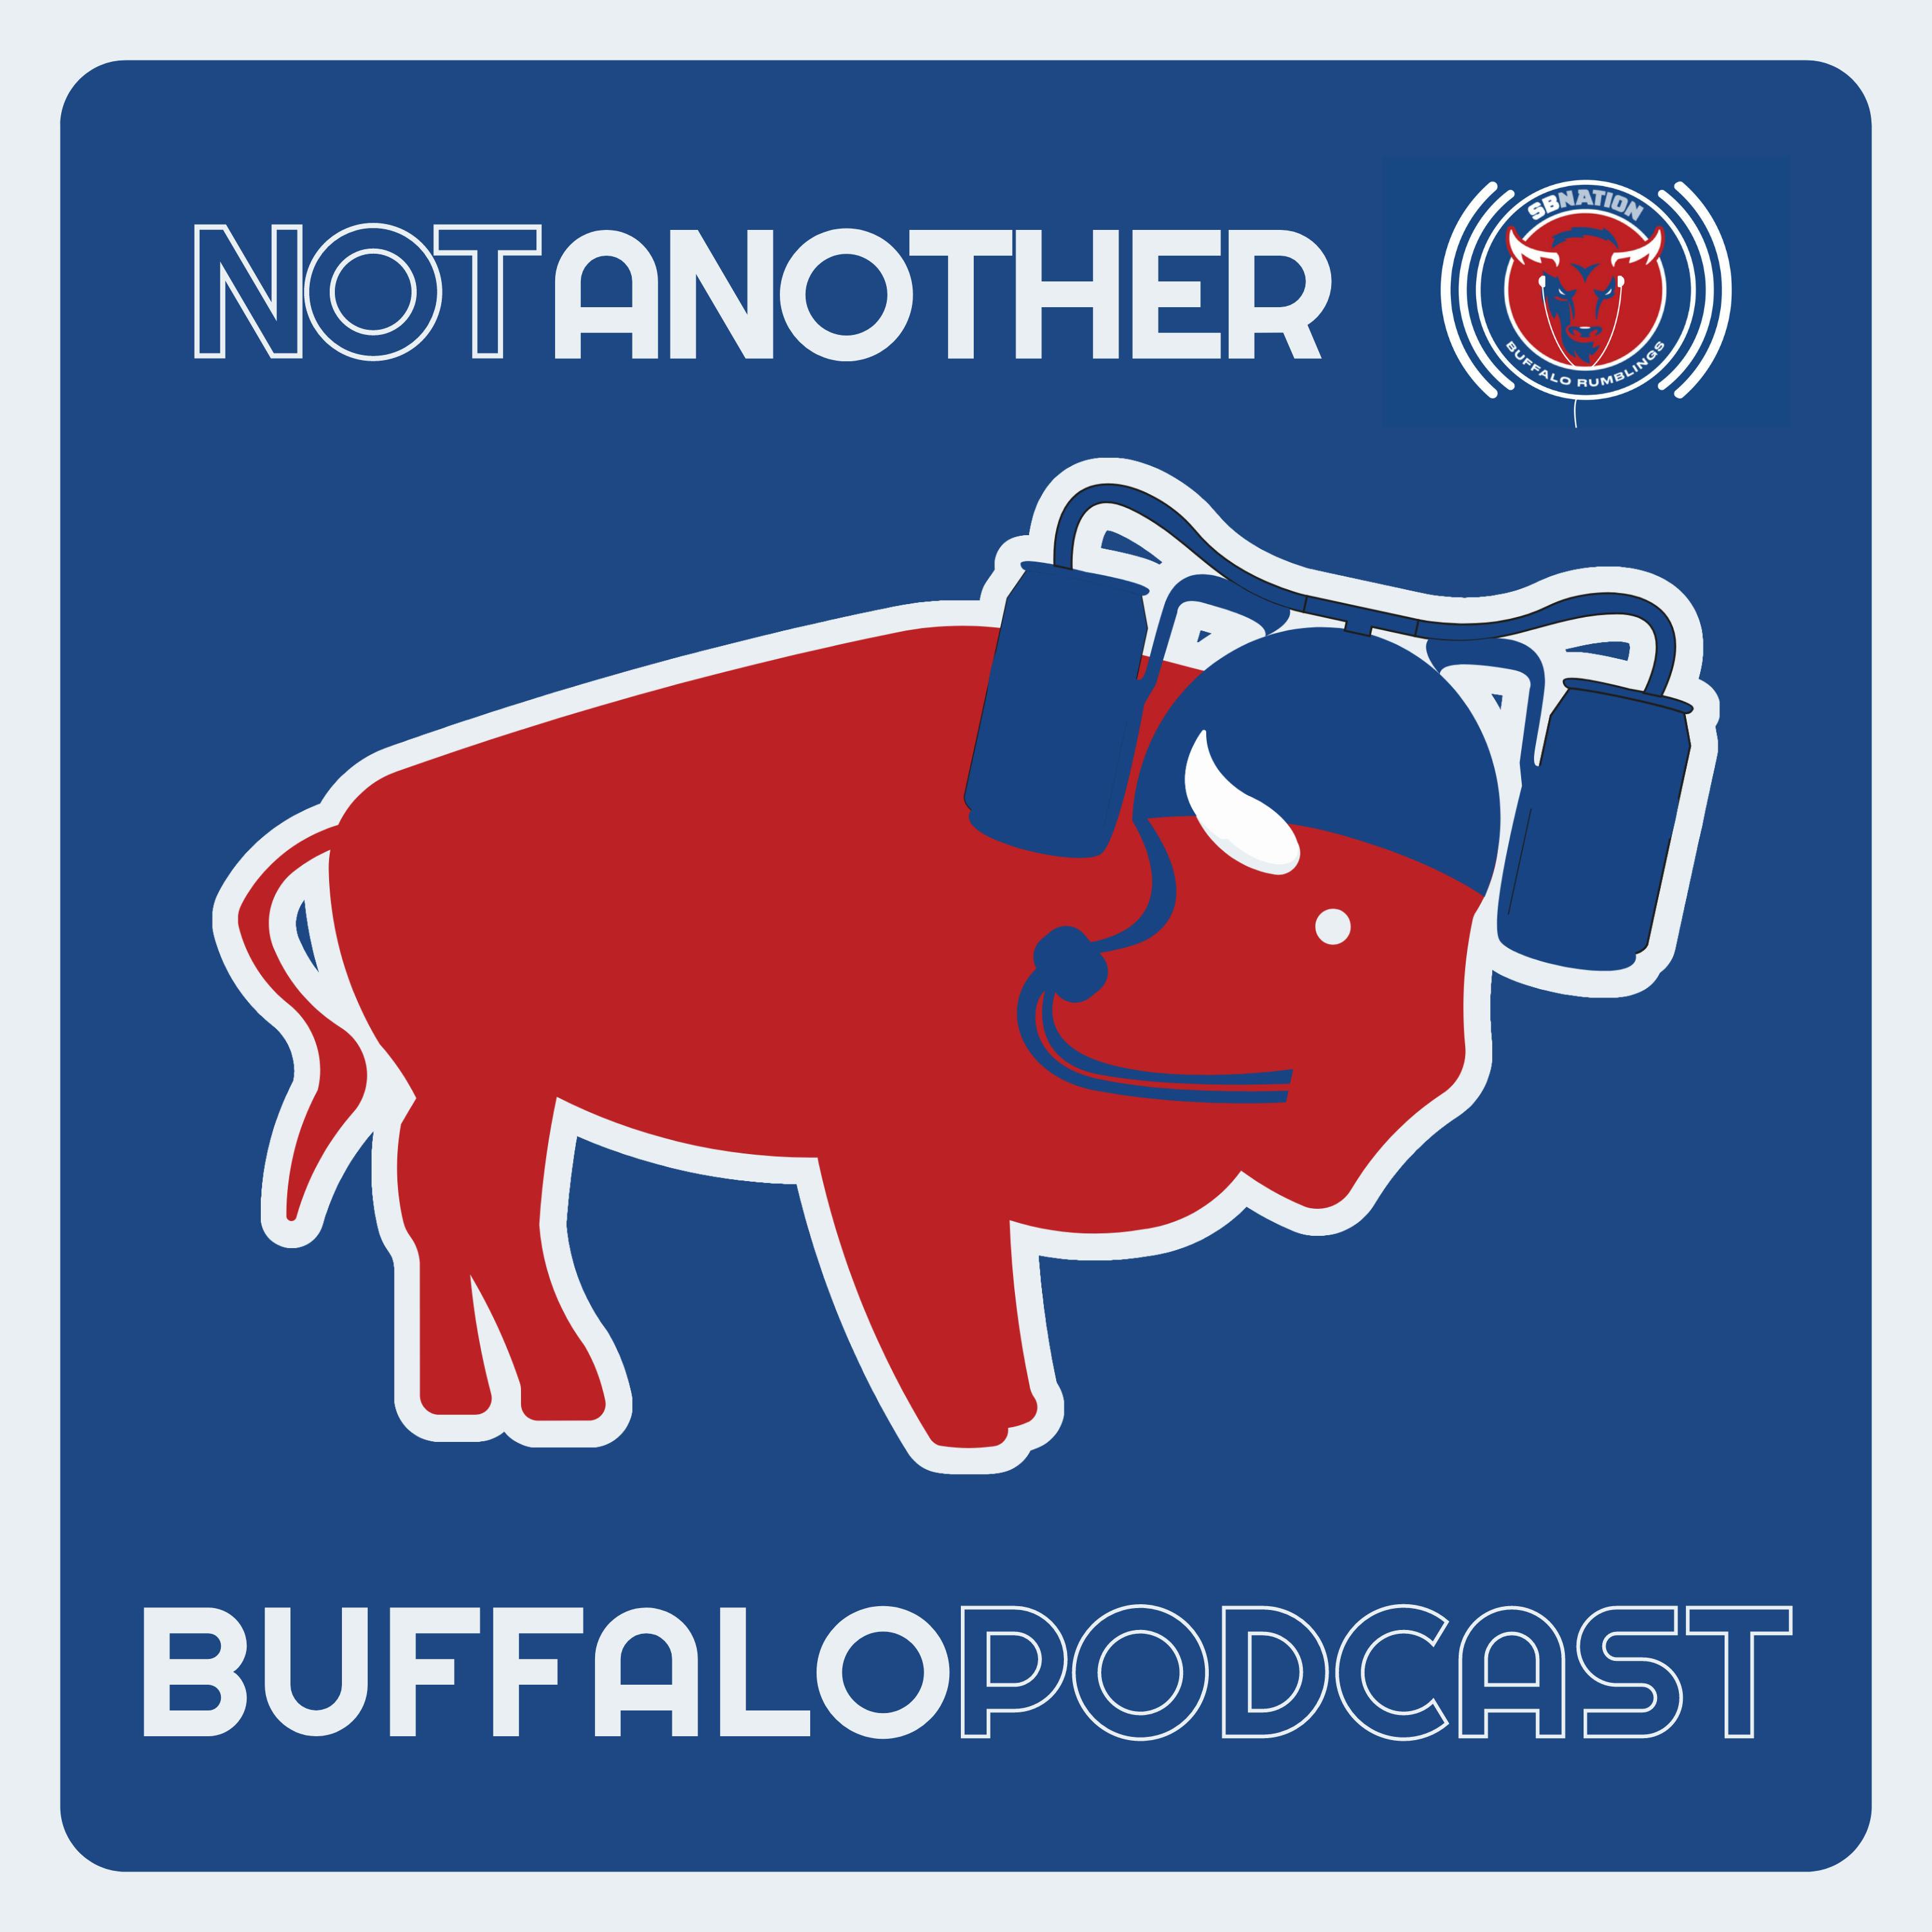 NABP | Episode 200 of Not Another Buffalo Podcast